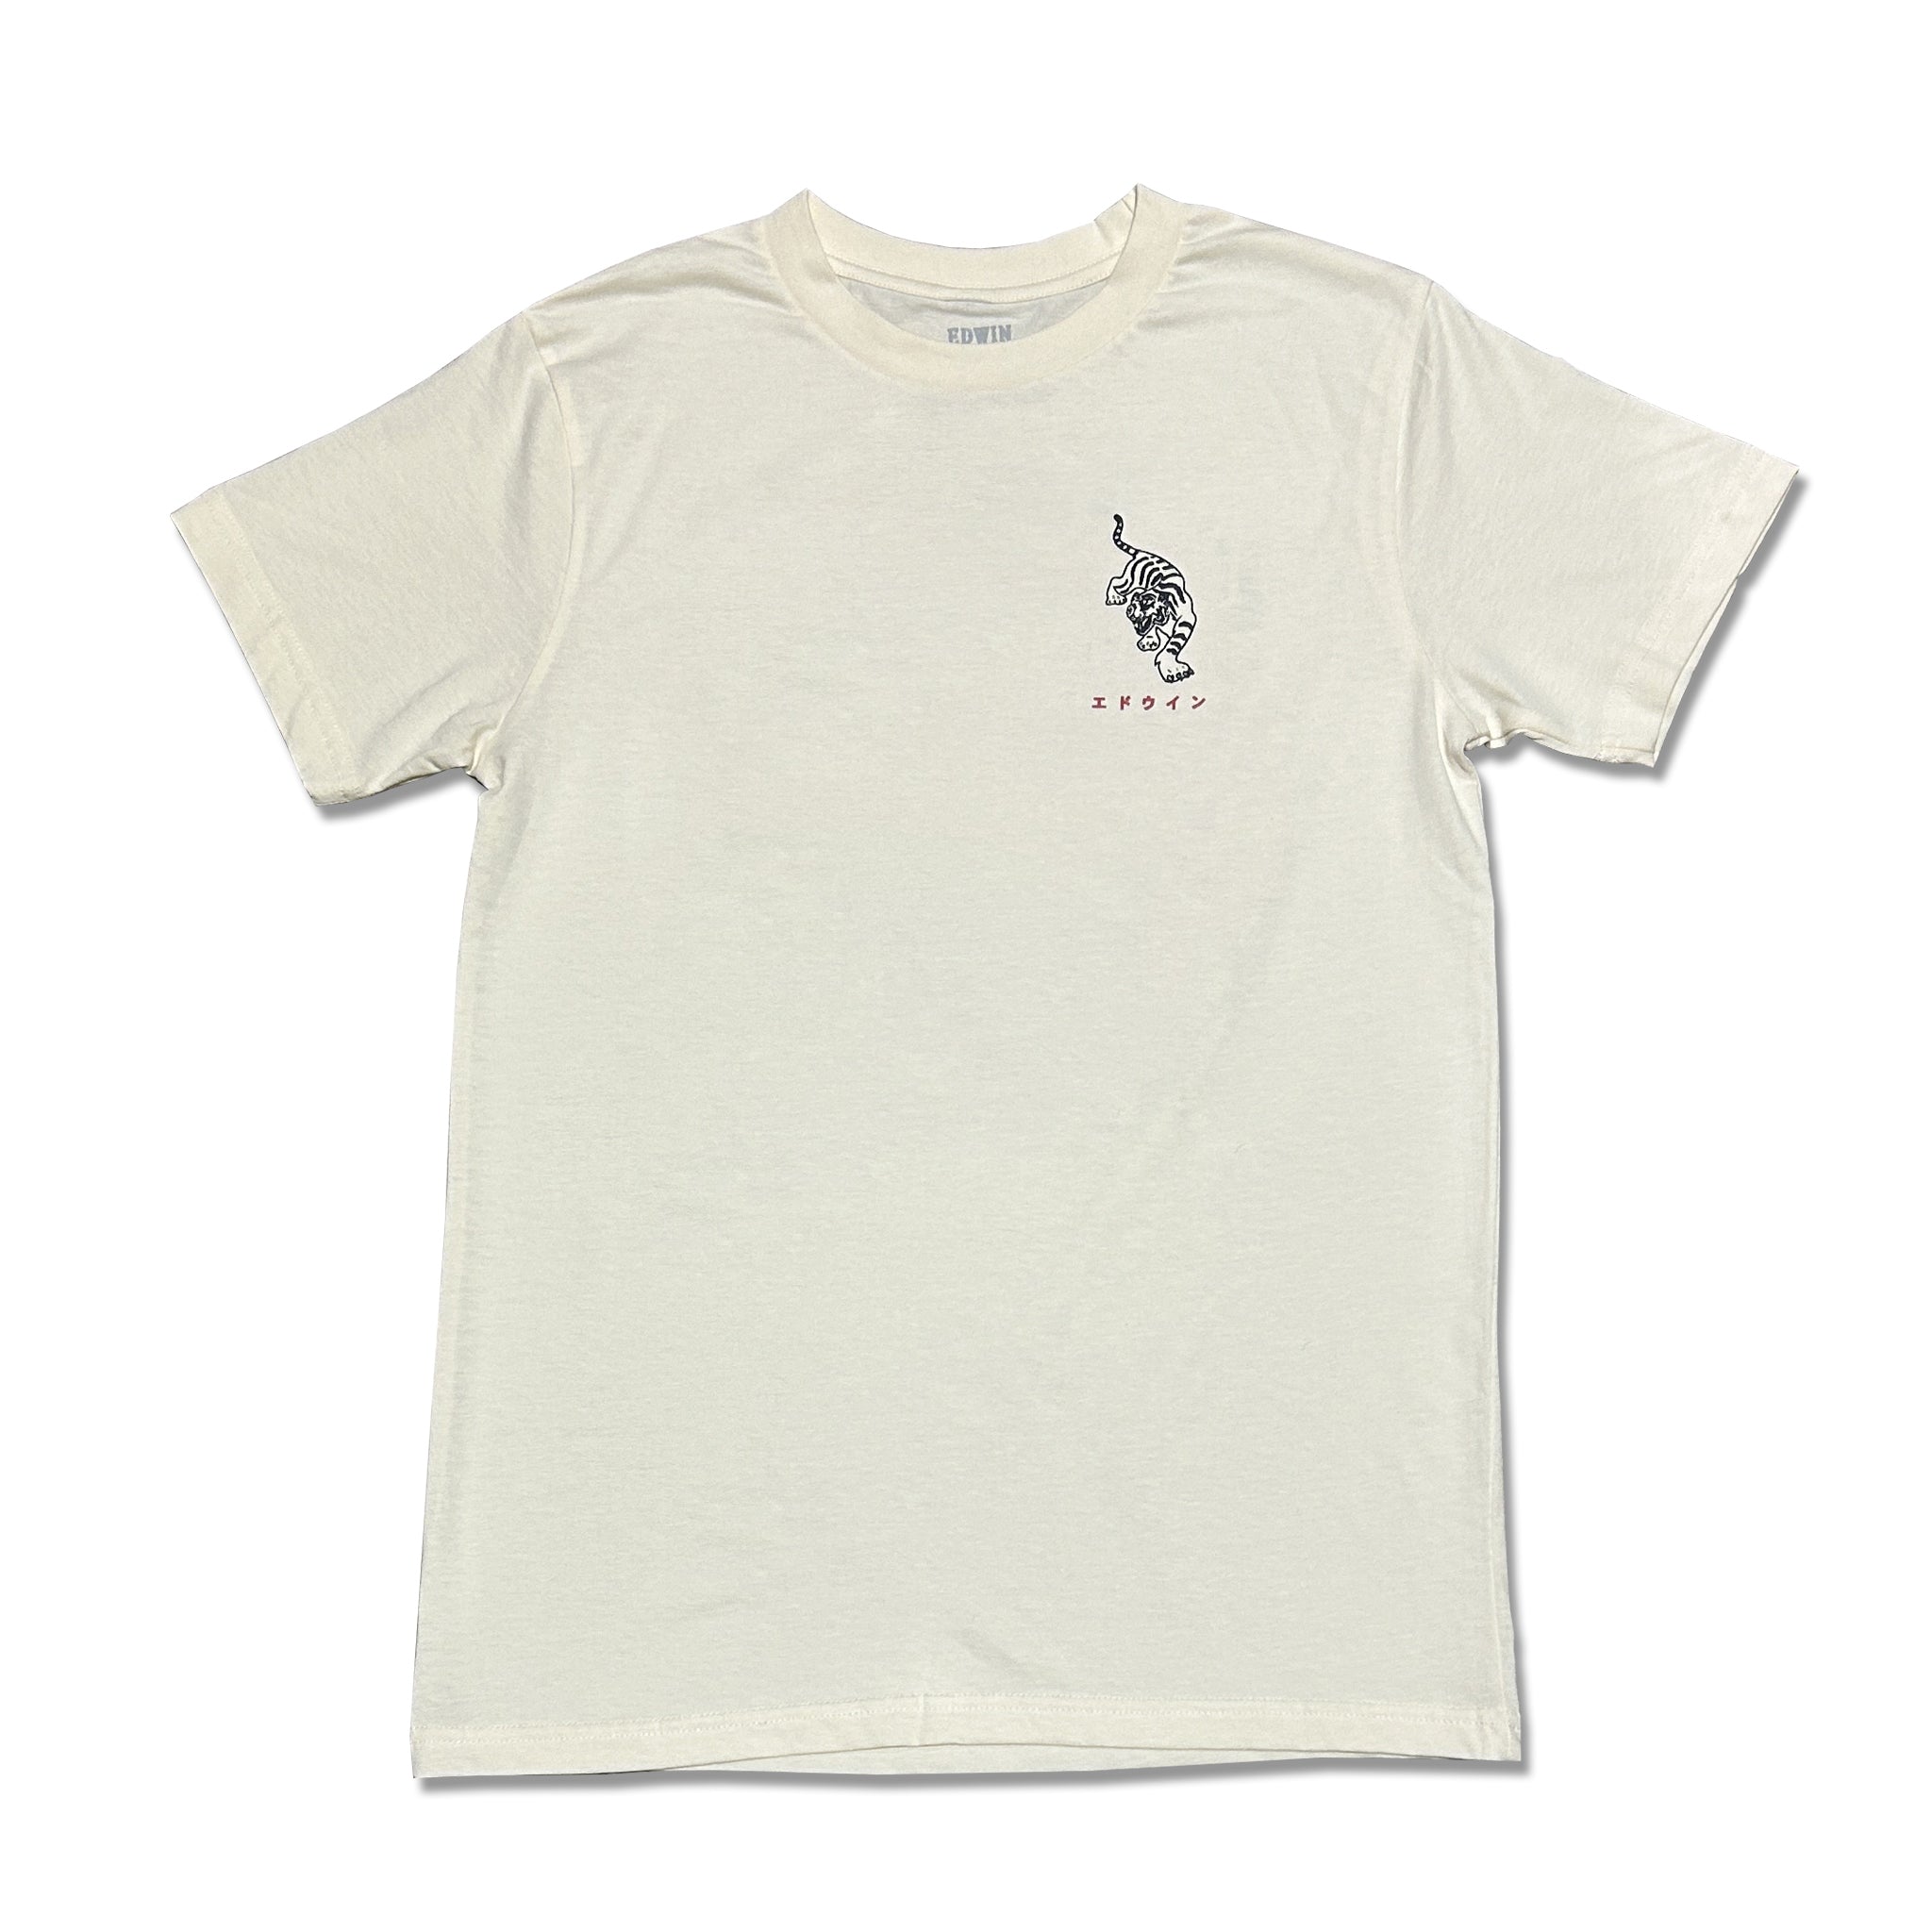 Edwin 100 % Recycled Cotton Short Sleeve Tee